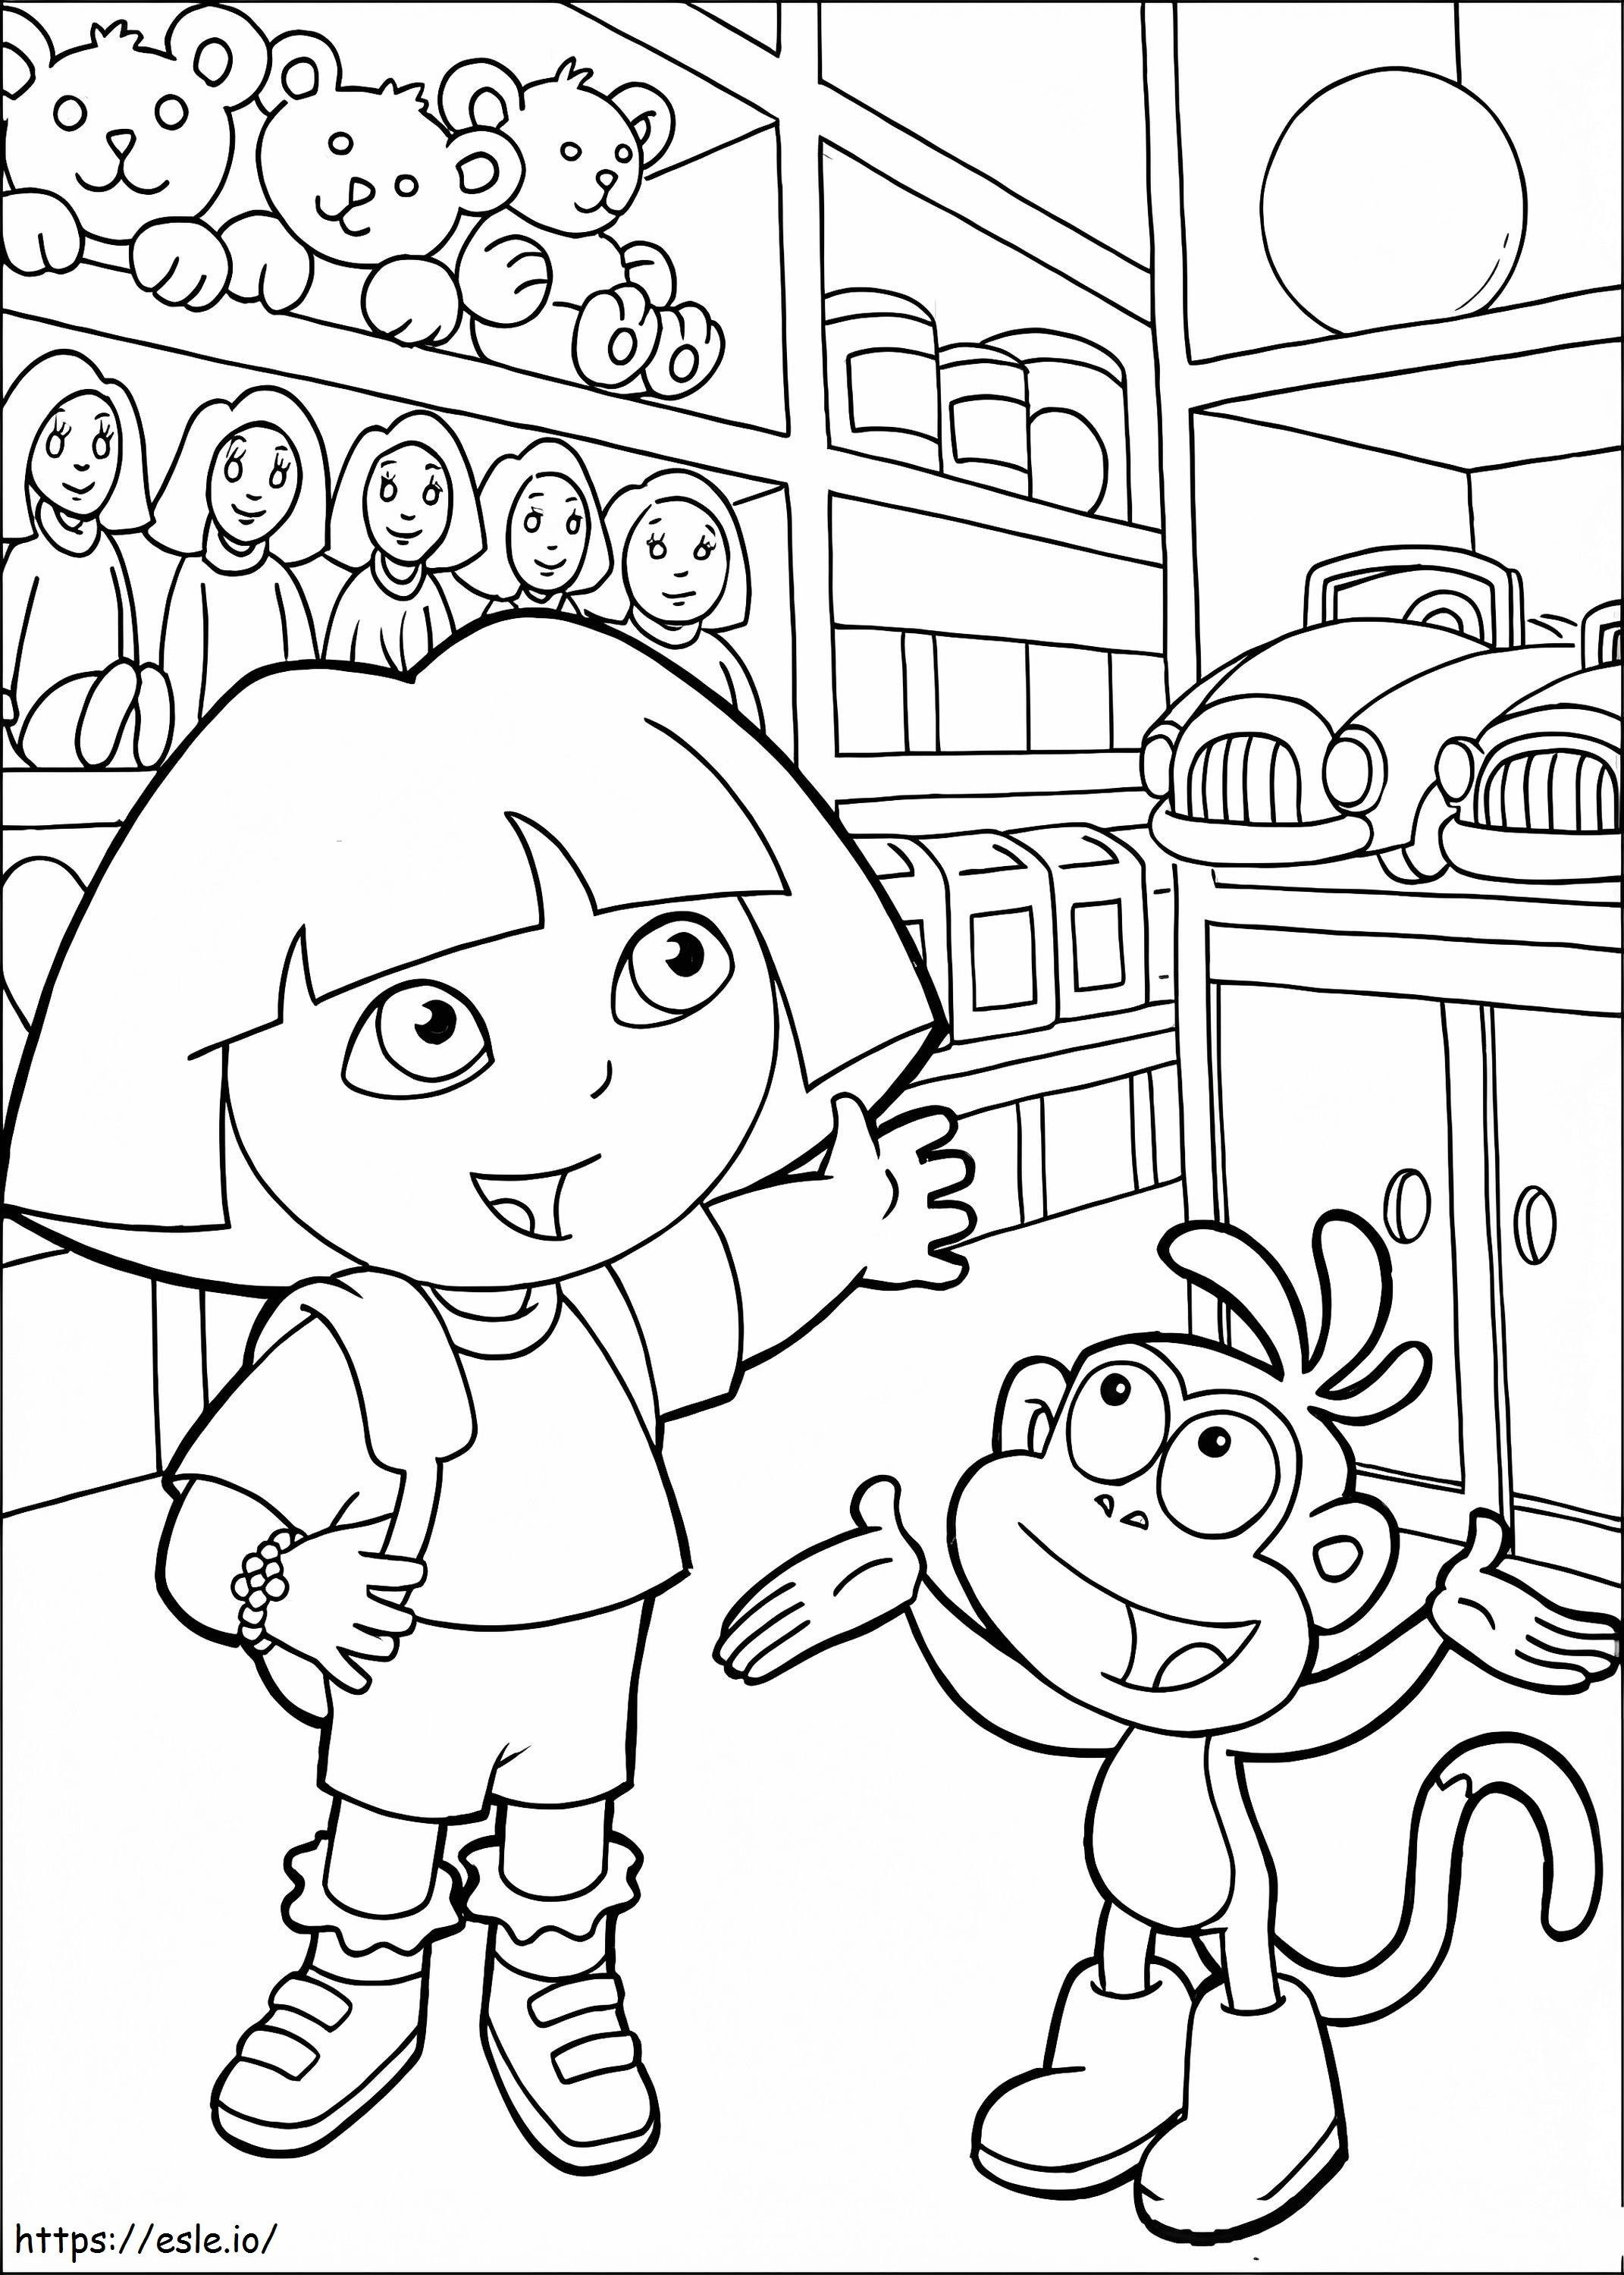 Dora In Toy Store coloring page